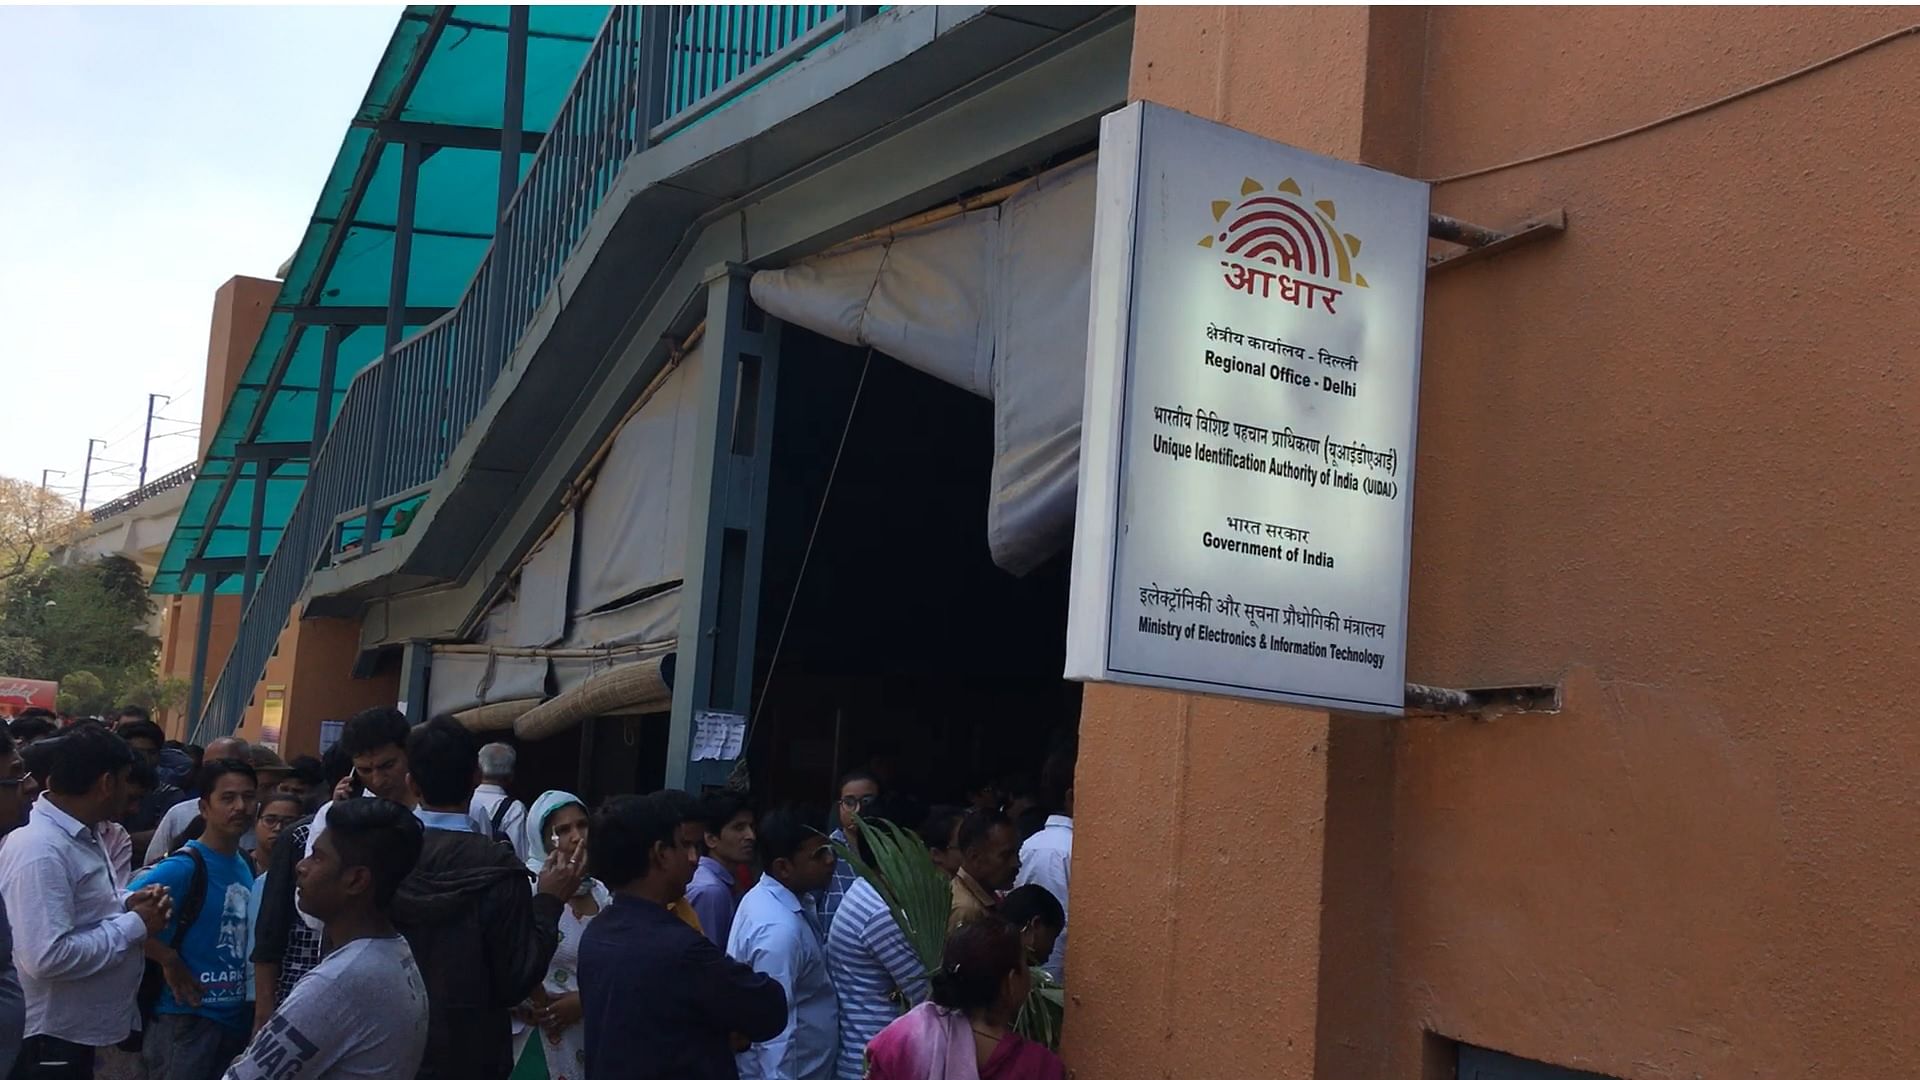 The social welfare department further warned that administrative action will be taken against the responsible officers who denied pension on the basis of aadhaar.